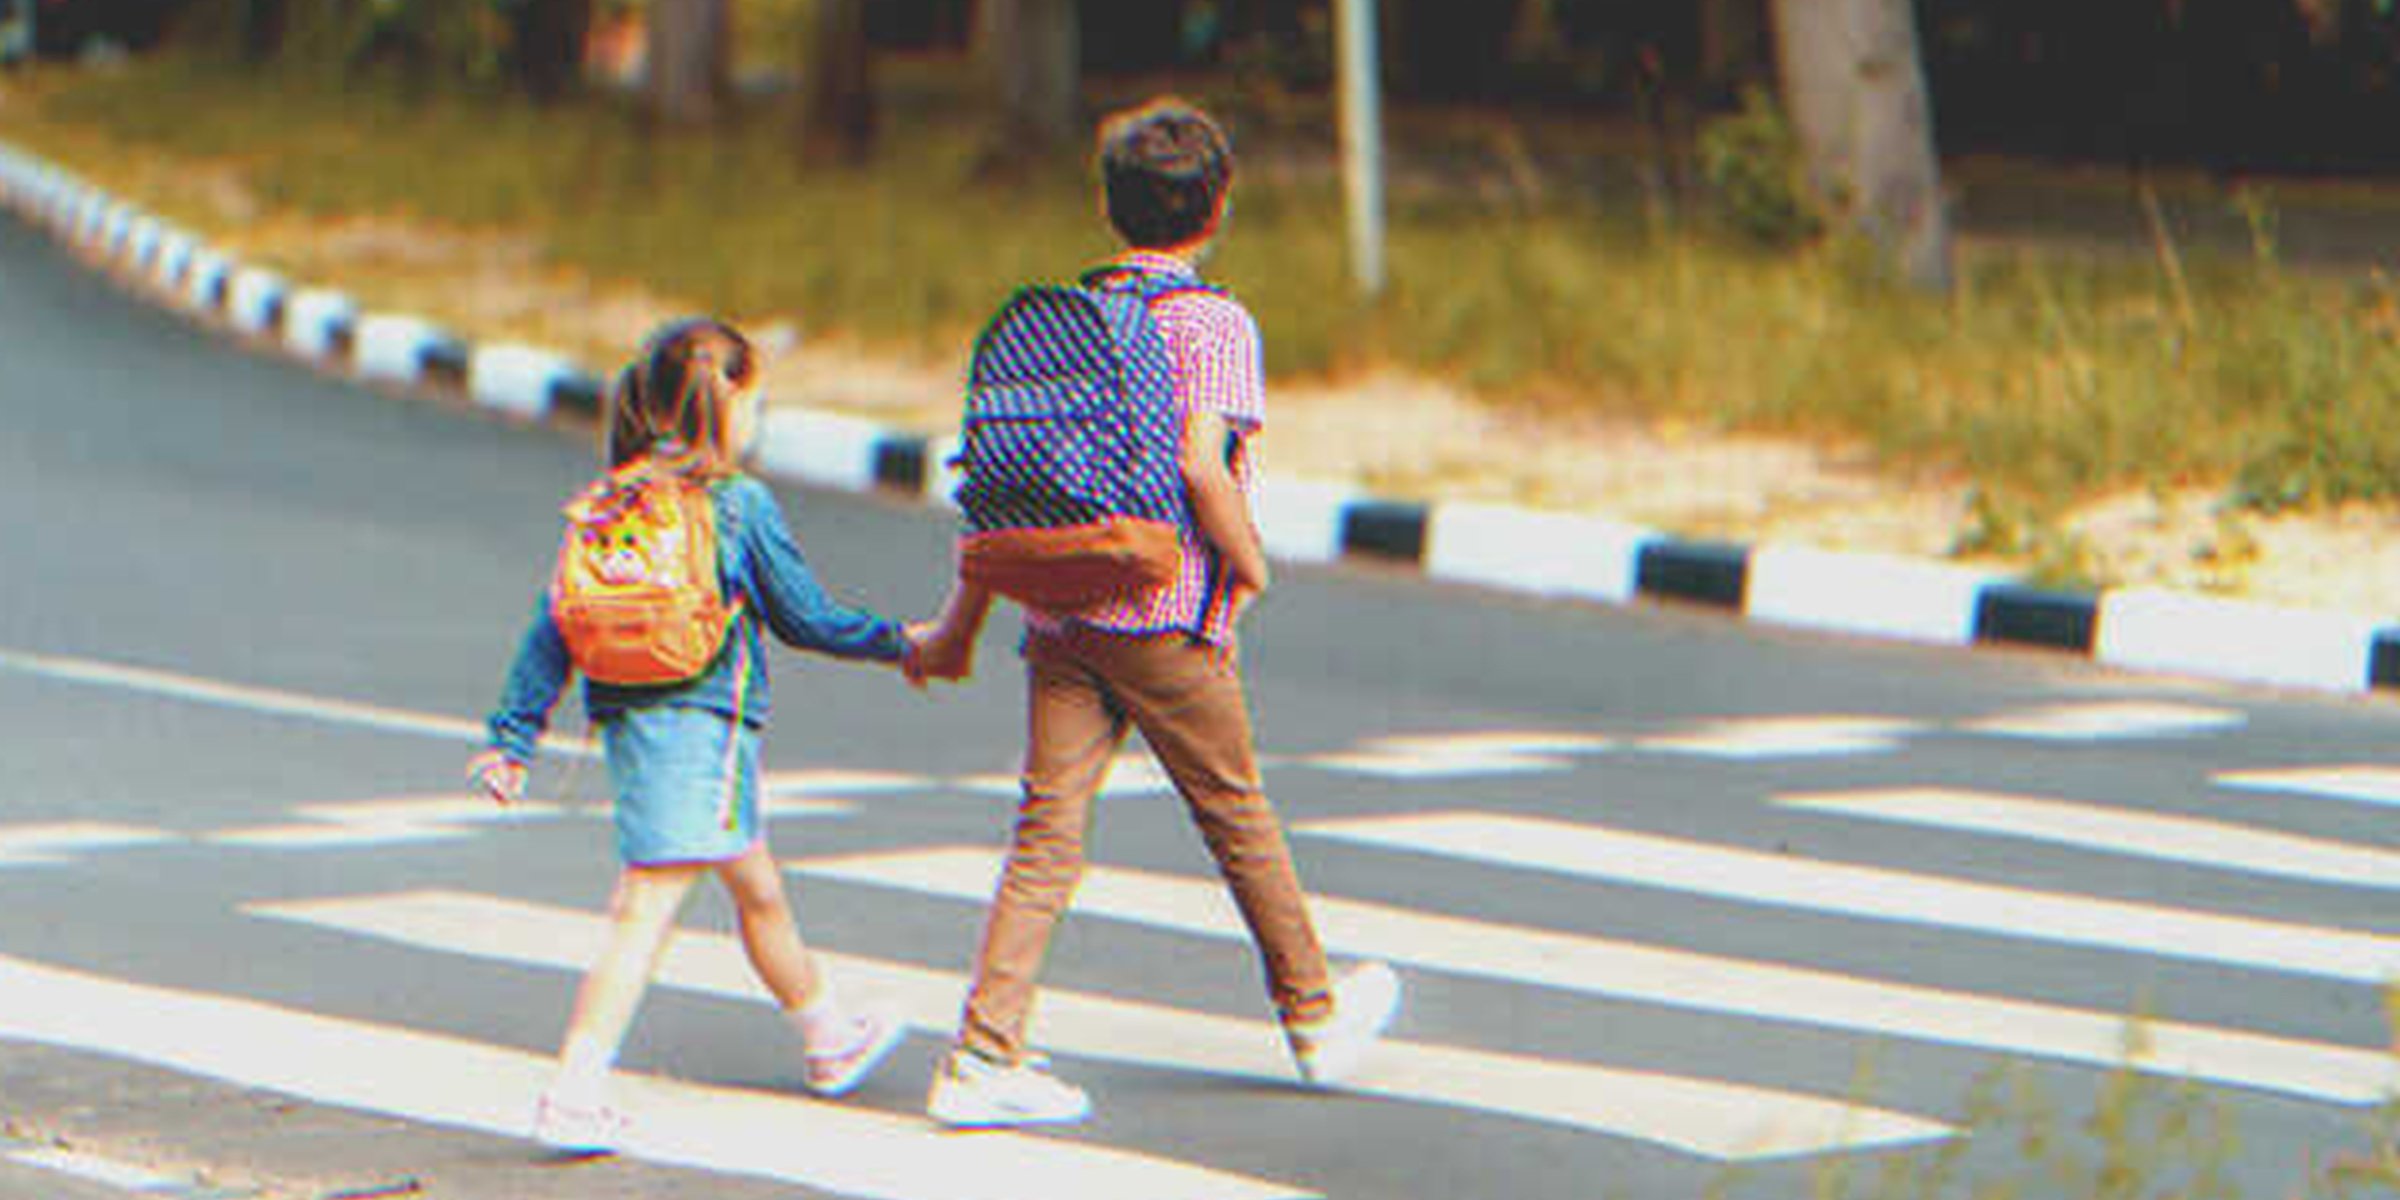 A boy walking down the street holding the hand of a little girl | Source: Shutterstock